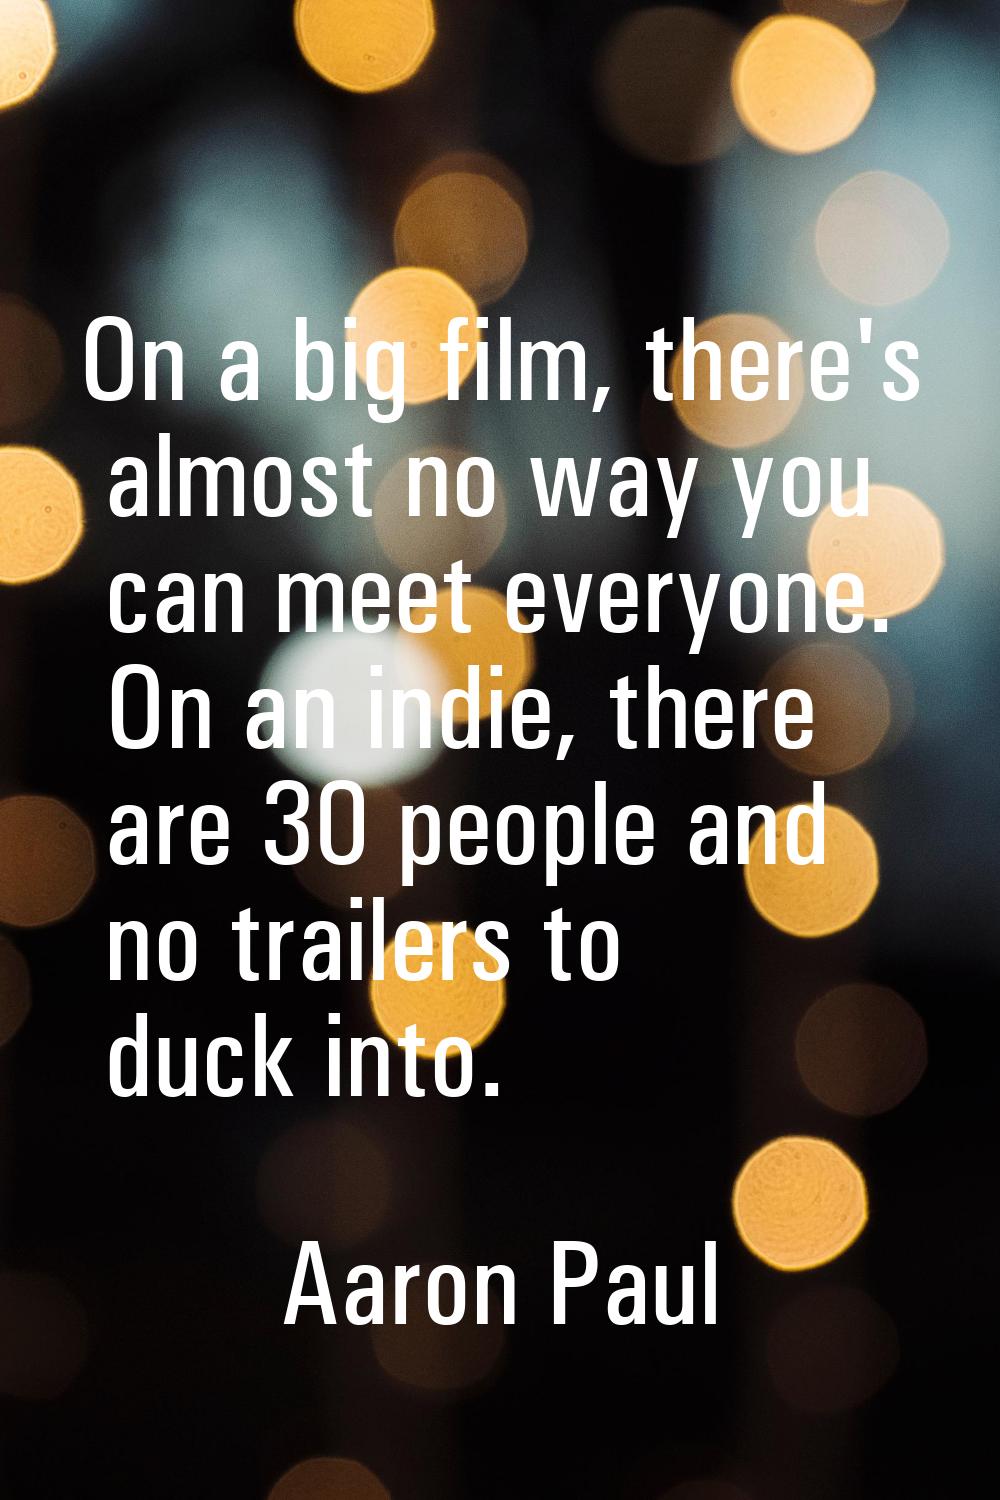 On a big film, there's almost no way you can meet everyone. On an indie, there are 30 people and no